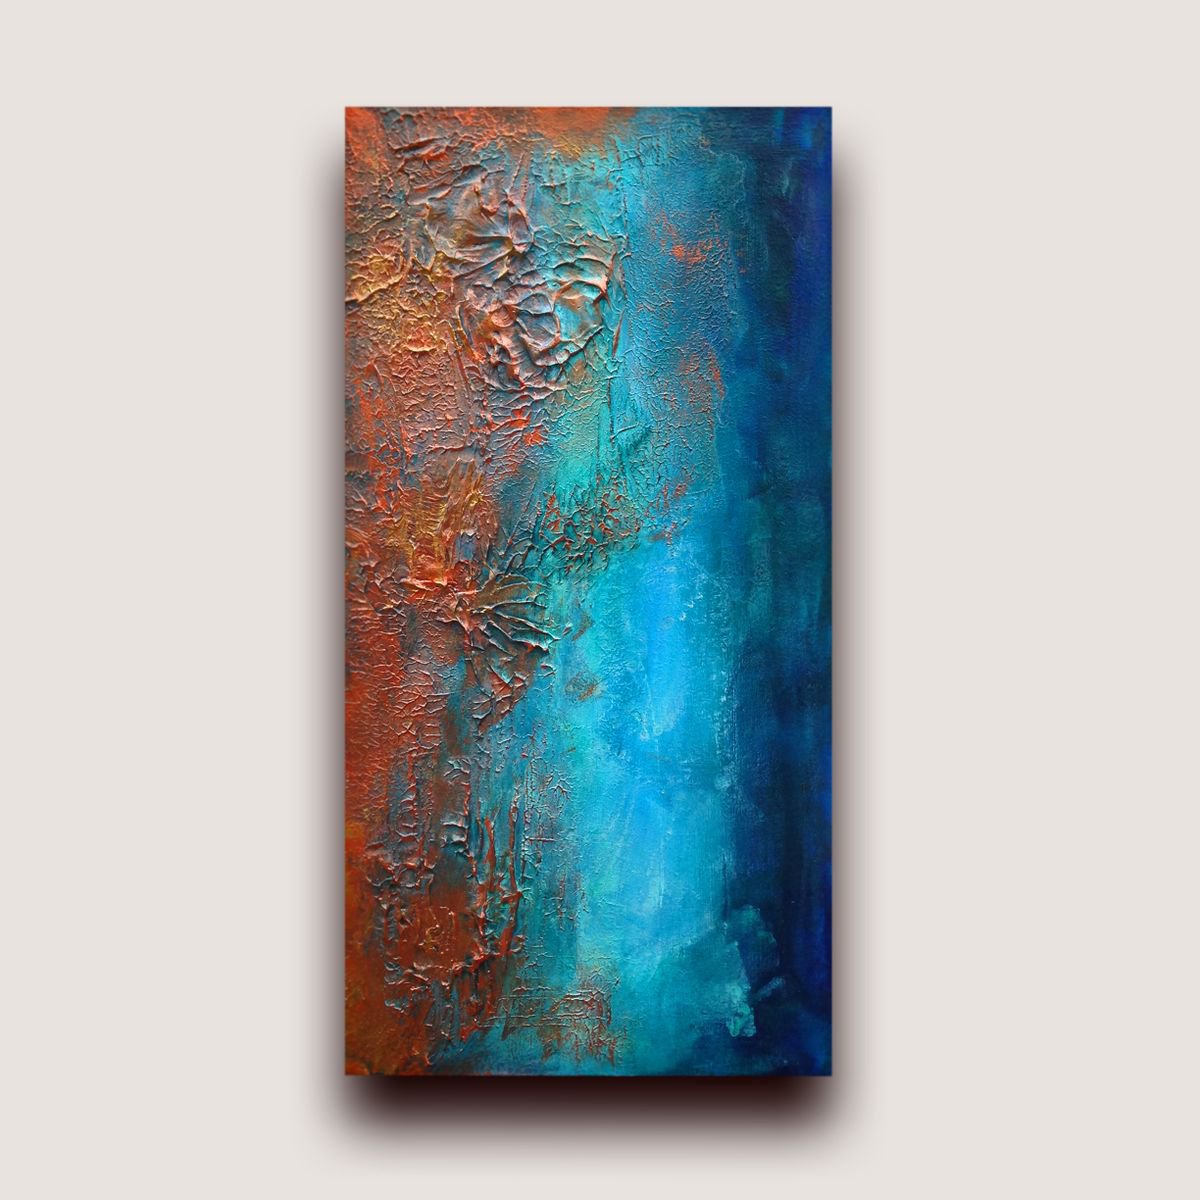 Abstract painting - Decay #10 by Matthew Withey